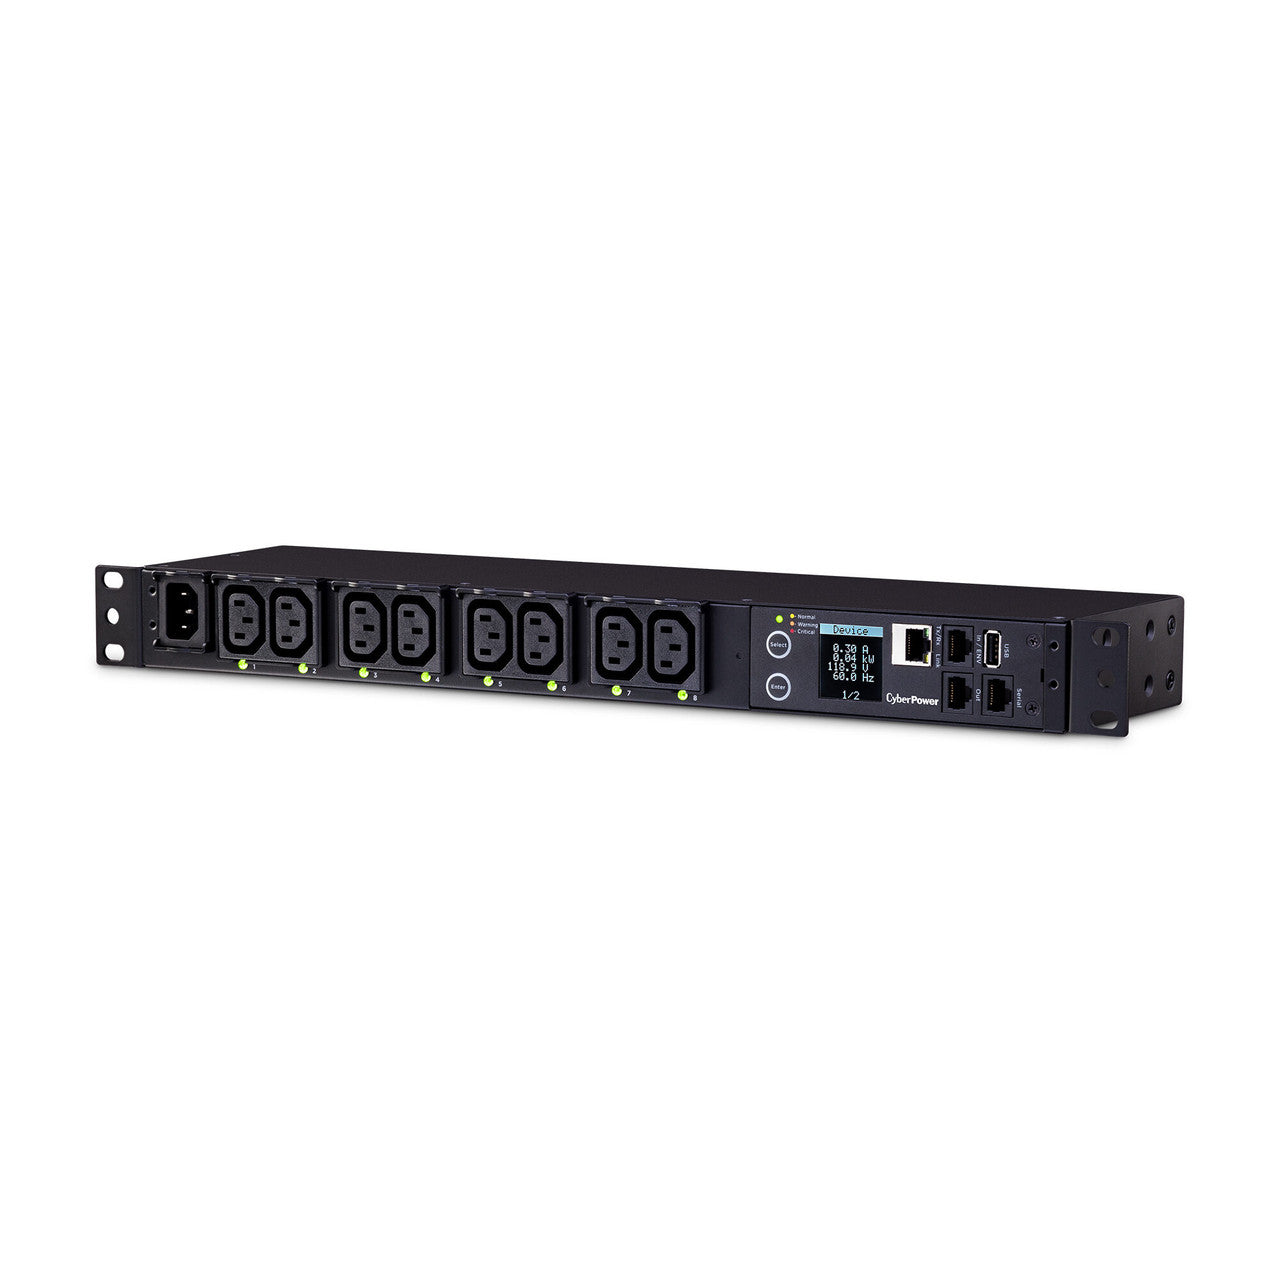 CyberPower PDU81004 SW MBO PDU 15A 100-240V Metered-by-Outlet Switched PDU 8 C13 Outlets 10ft cord 3yr Warranty